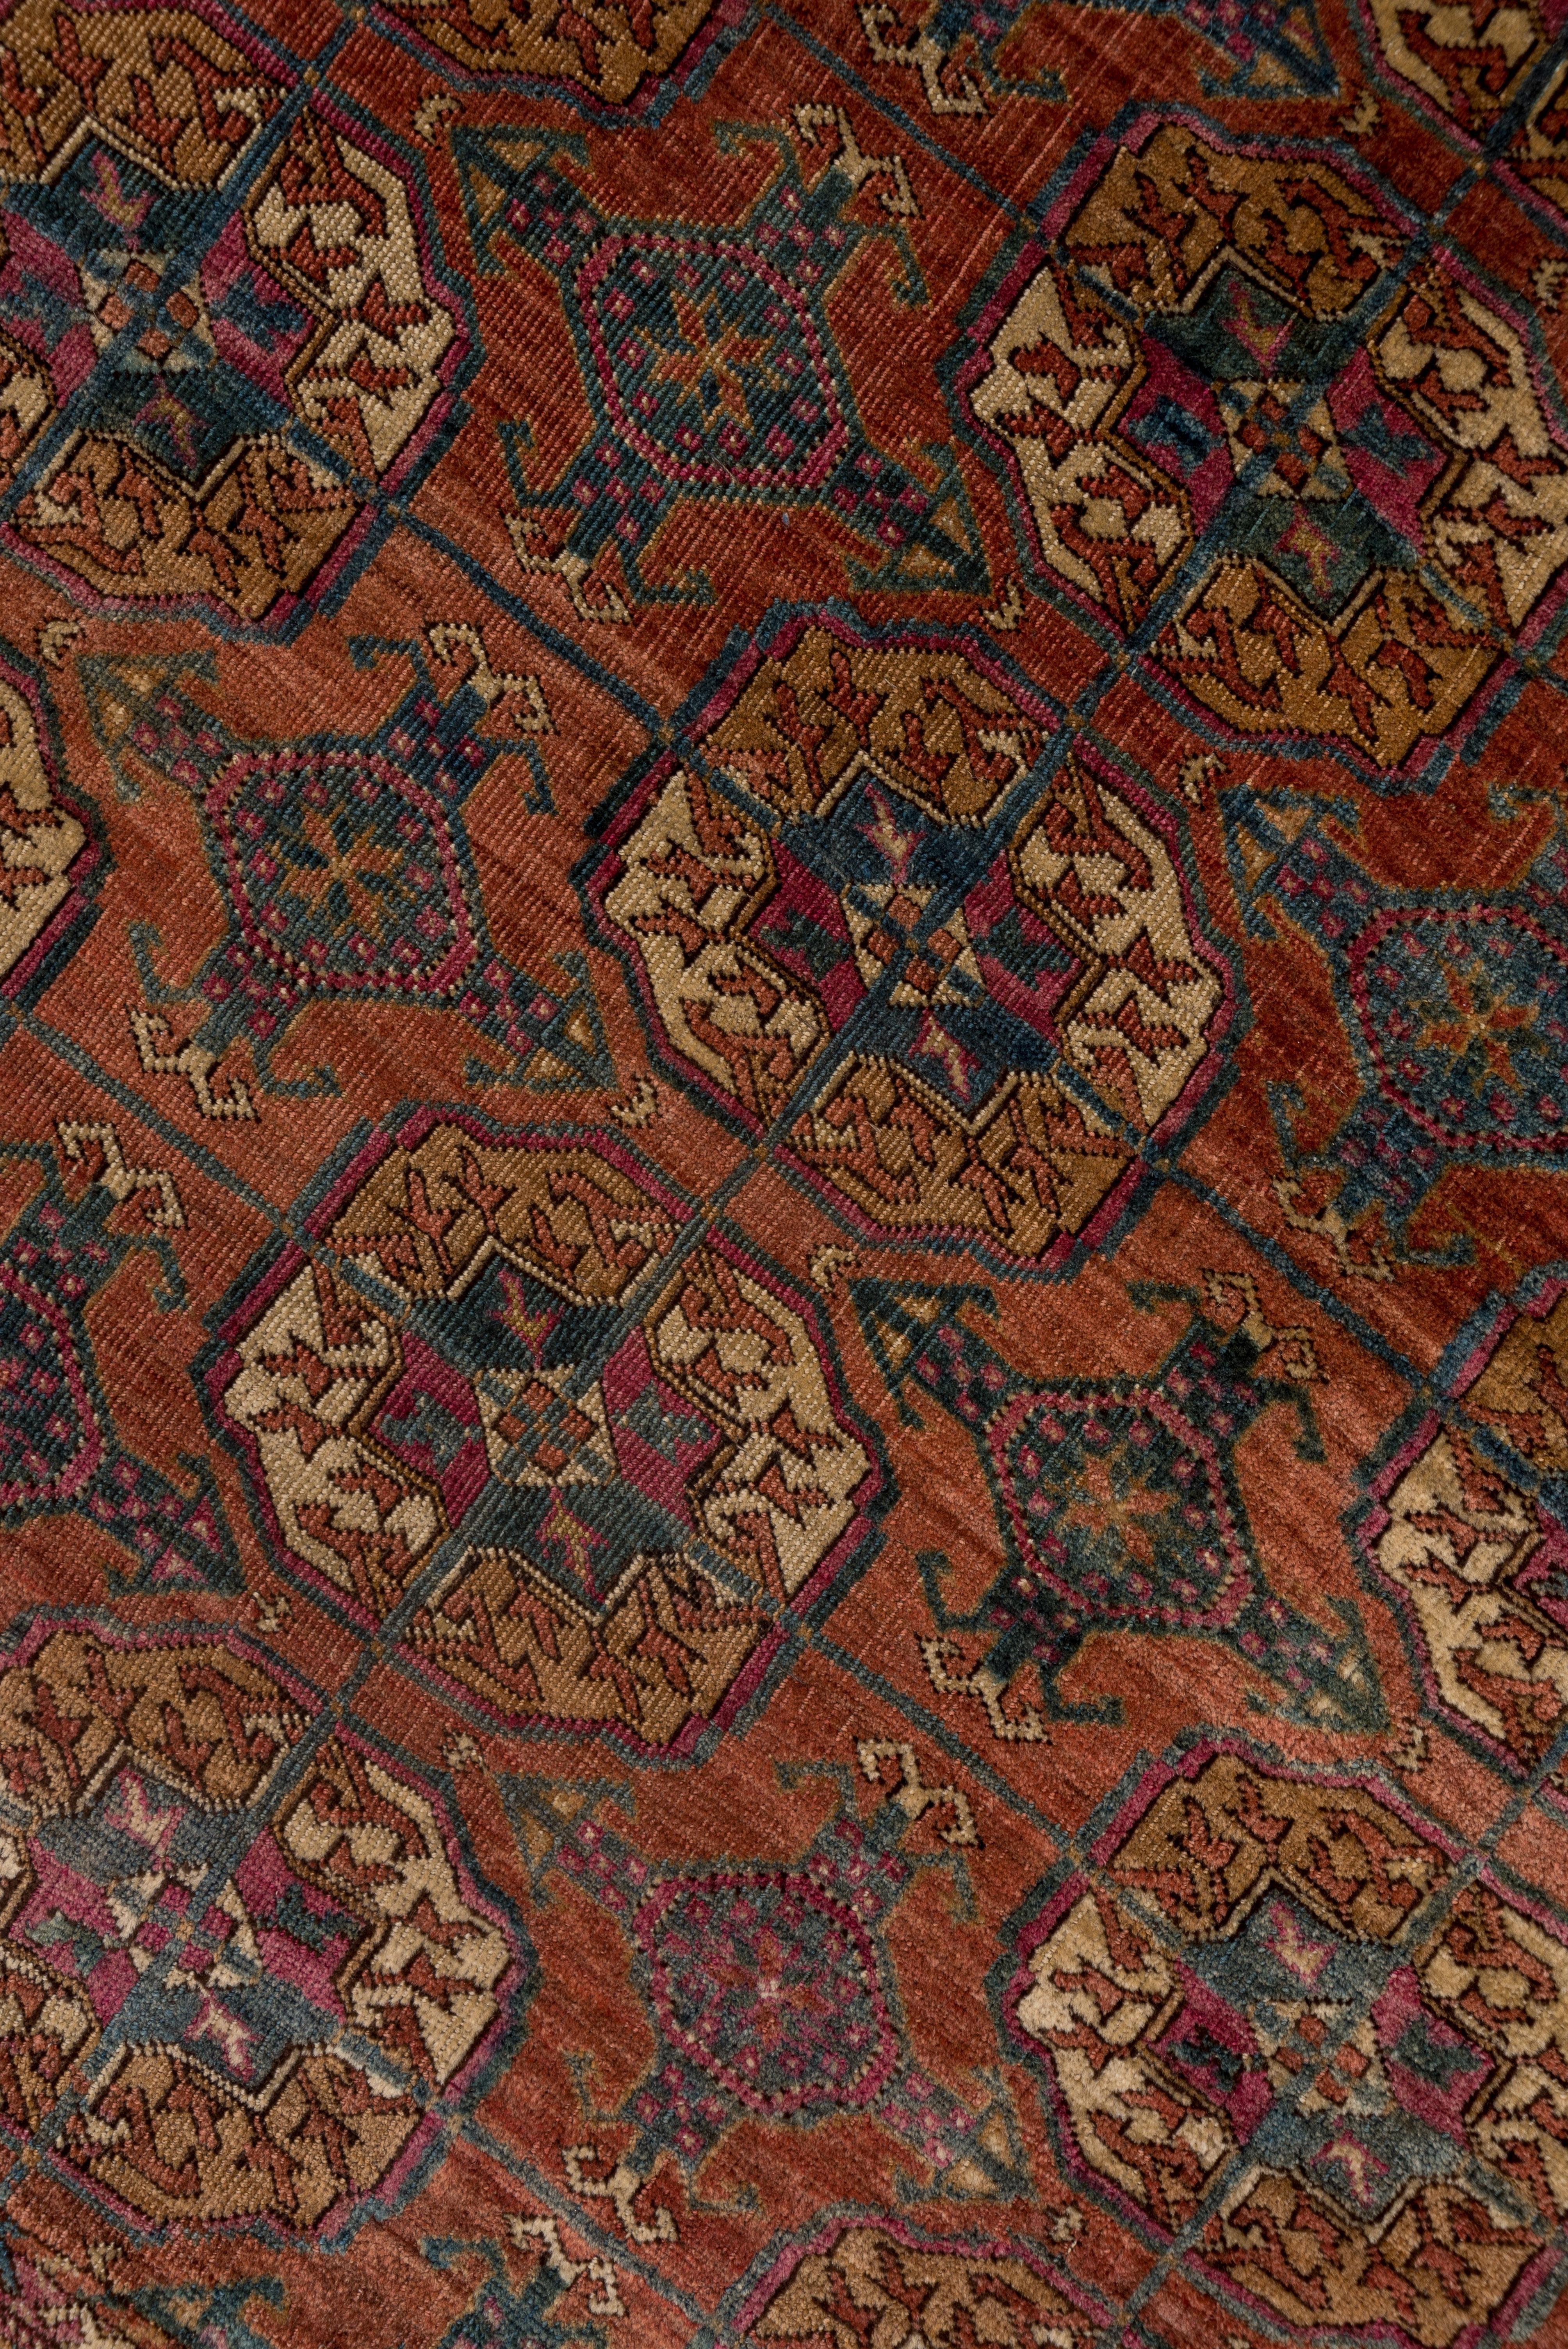 The abrashed rusty red field of this nomadic central Asian carpet displays five columns of characteristic quartered guls joined in a square lattice with kurbagh minor guls between. Main red border of rayed octagons enclosing crosses. All wool